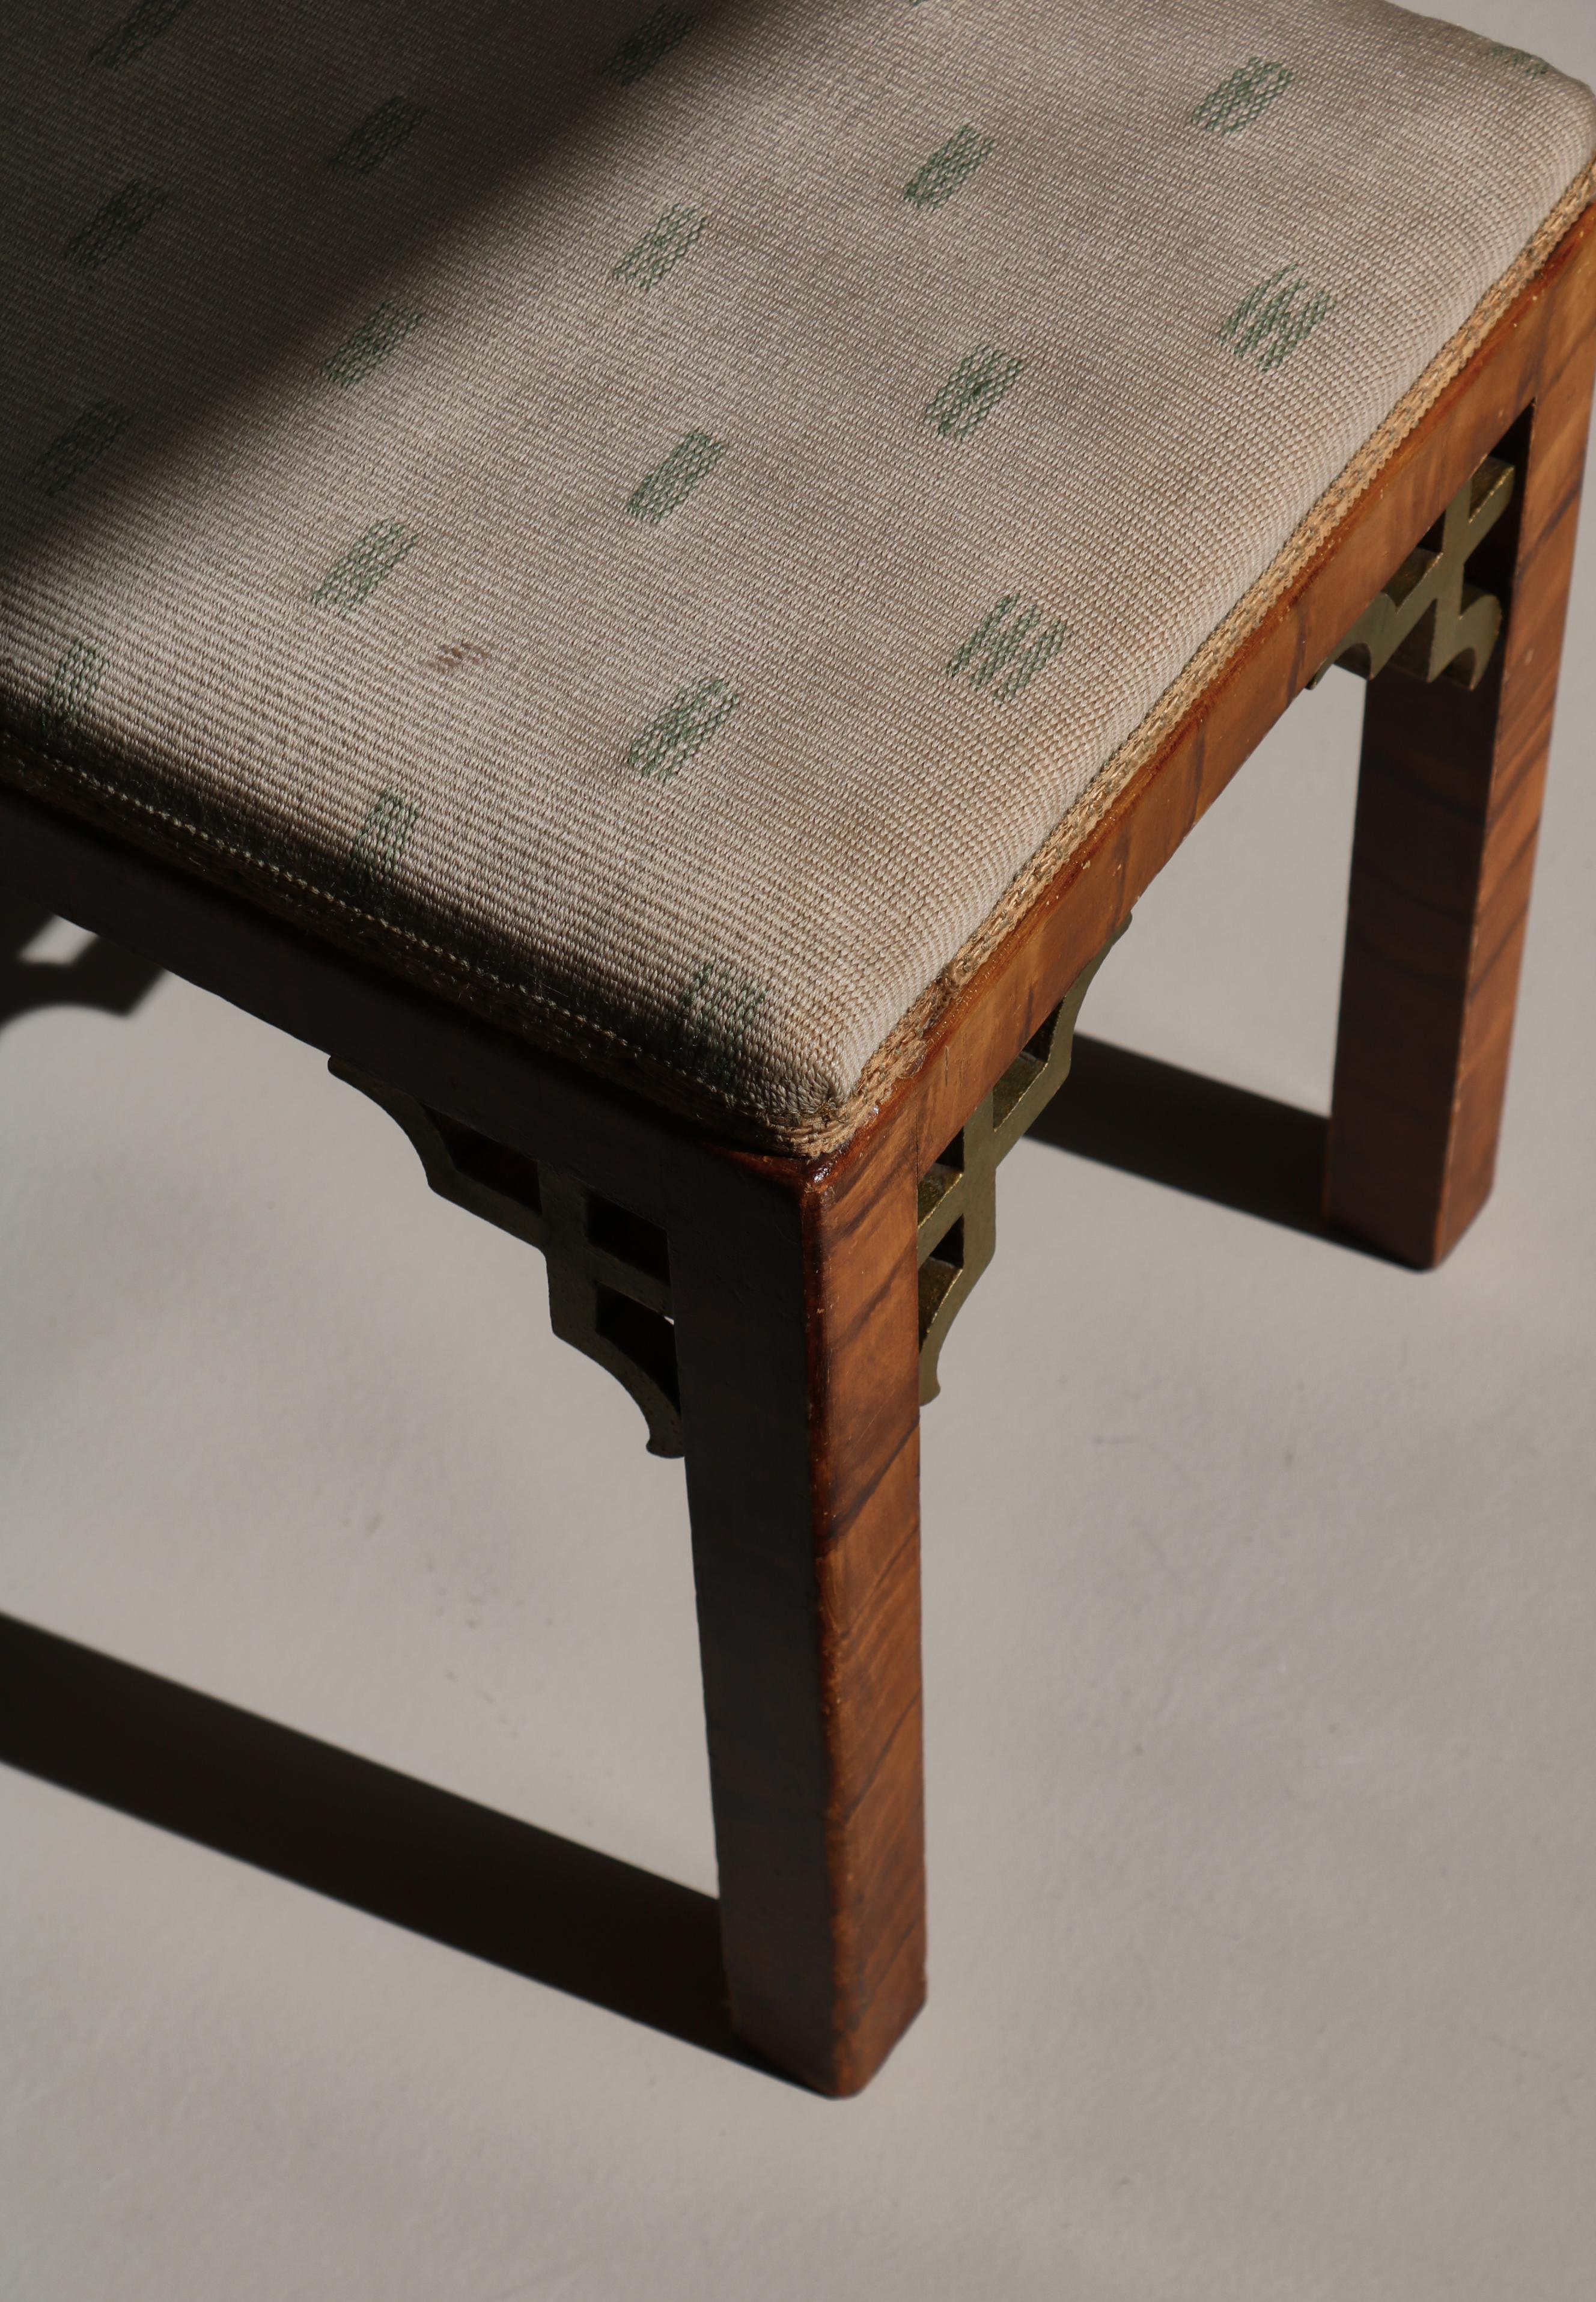 Scandinavian Art Deco Stool Chinoiserie Style in Original Upholstery, 1920s For Sale 5